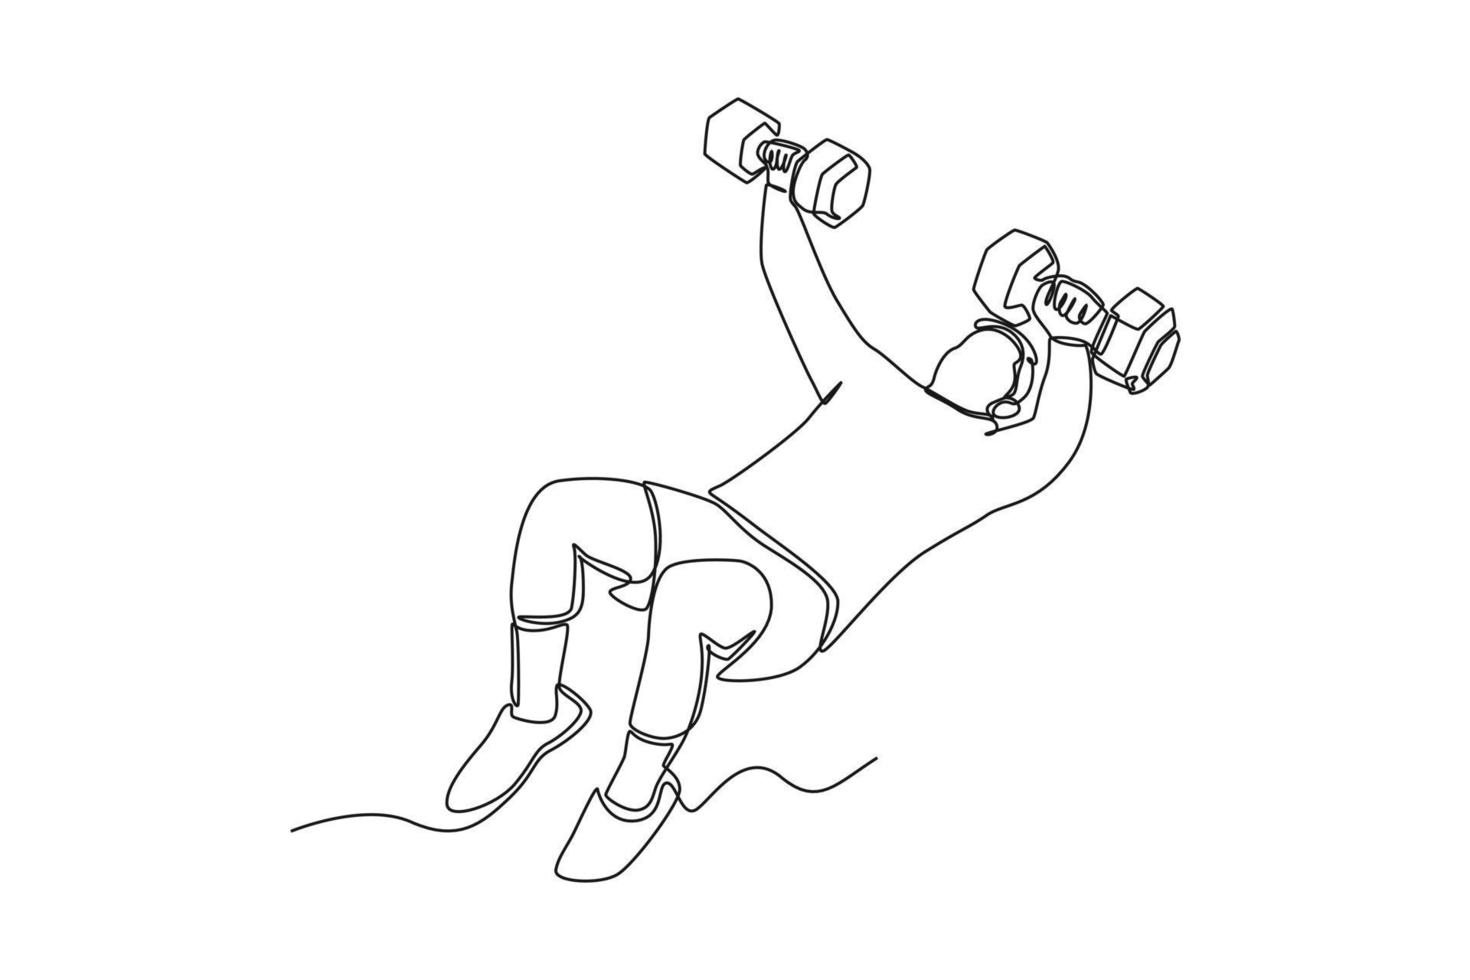 Single one line drawing man does floor dumbbell fly. Fitness activity concept. Continuous line draw design graphic vector illustration.